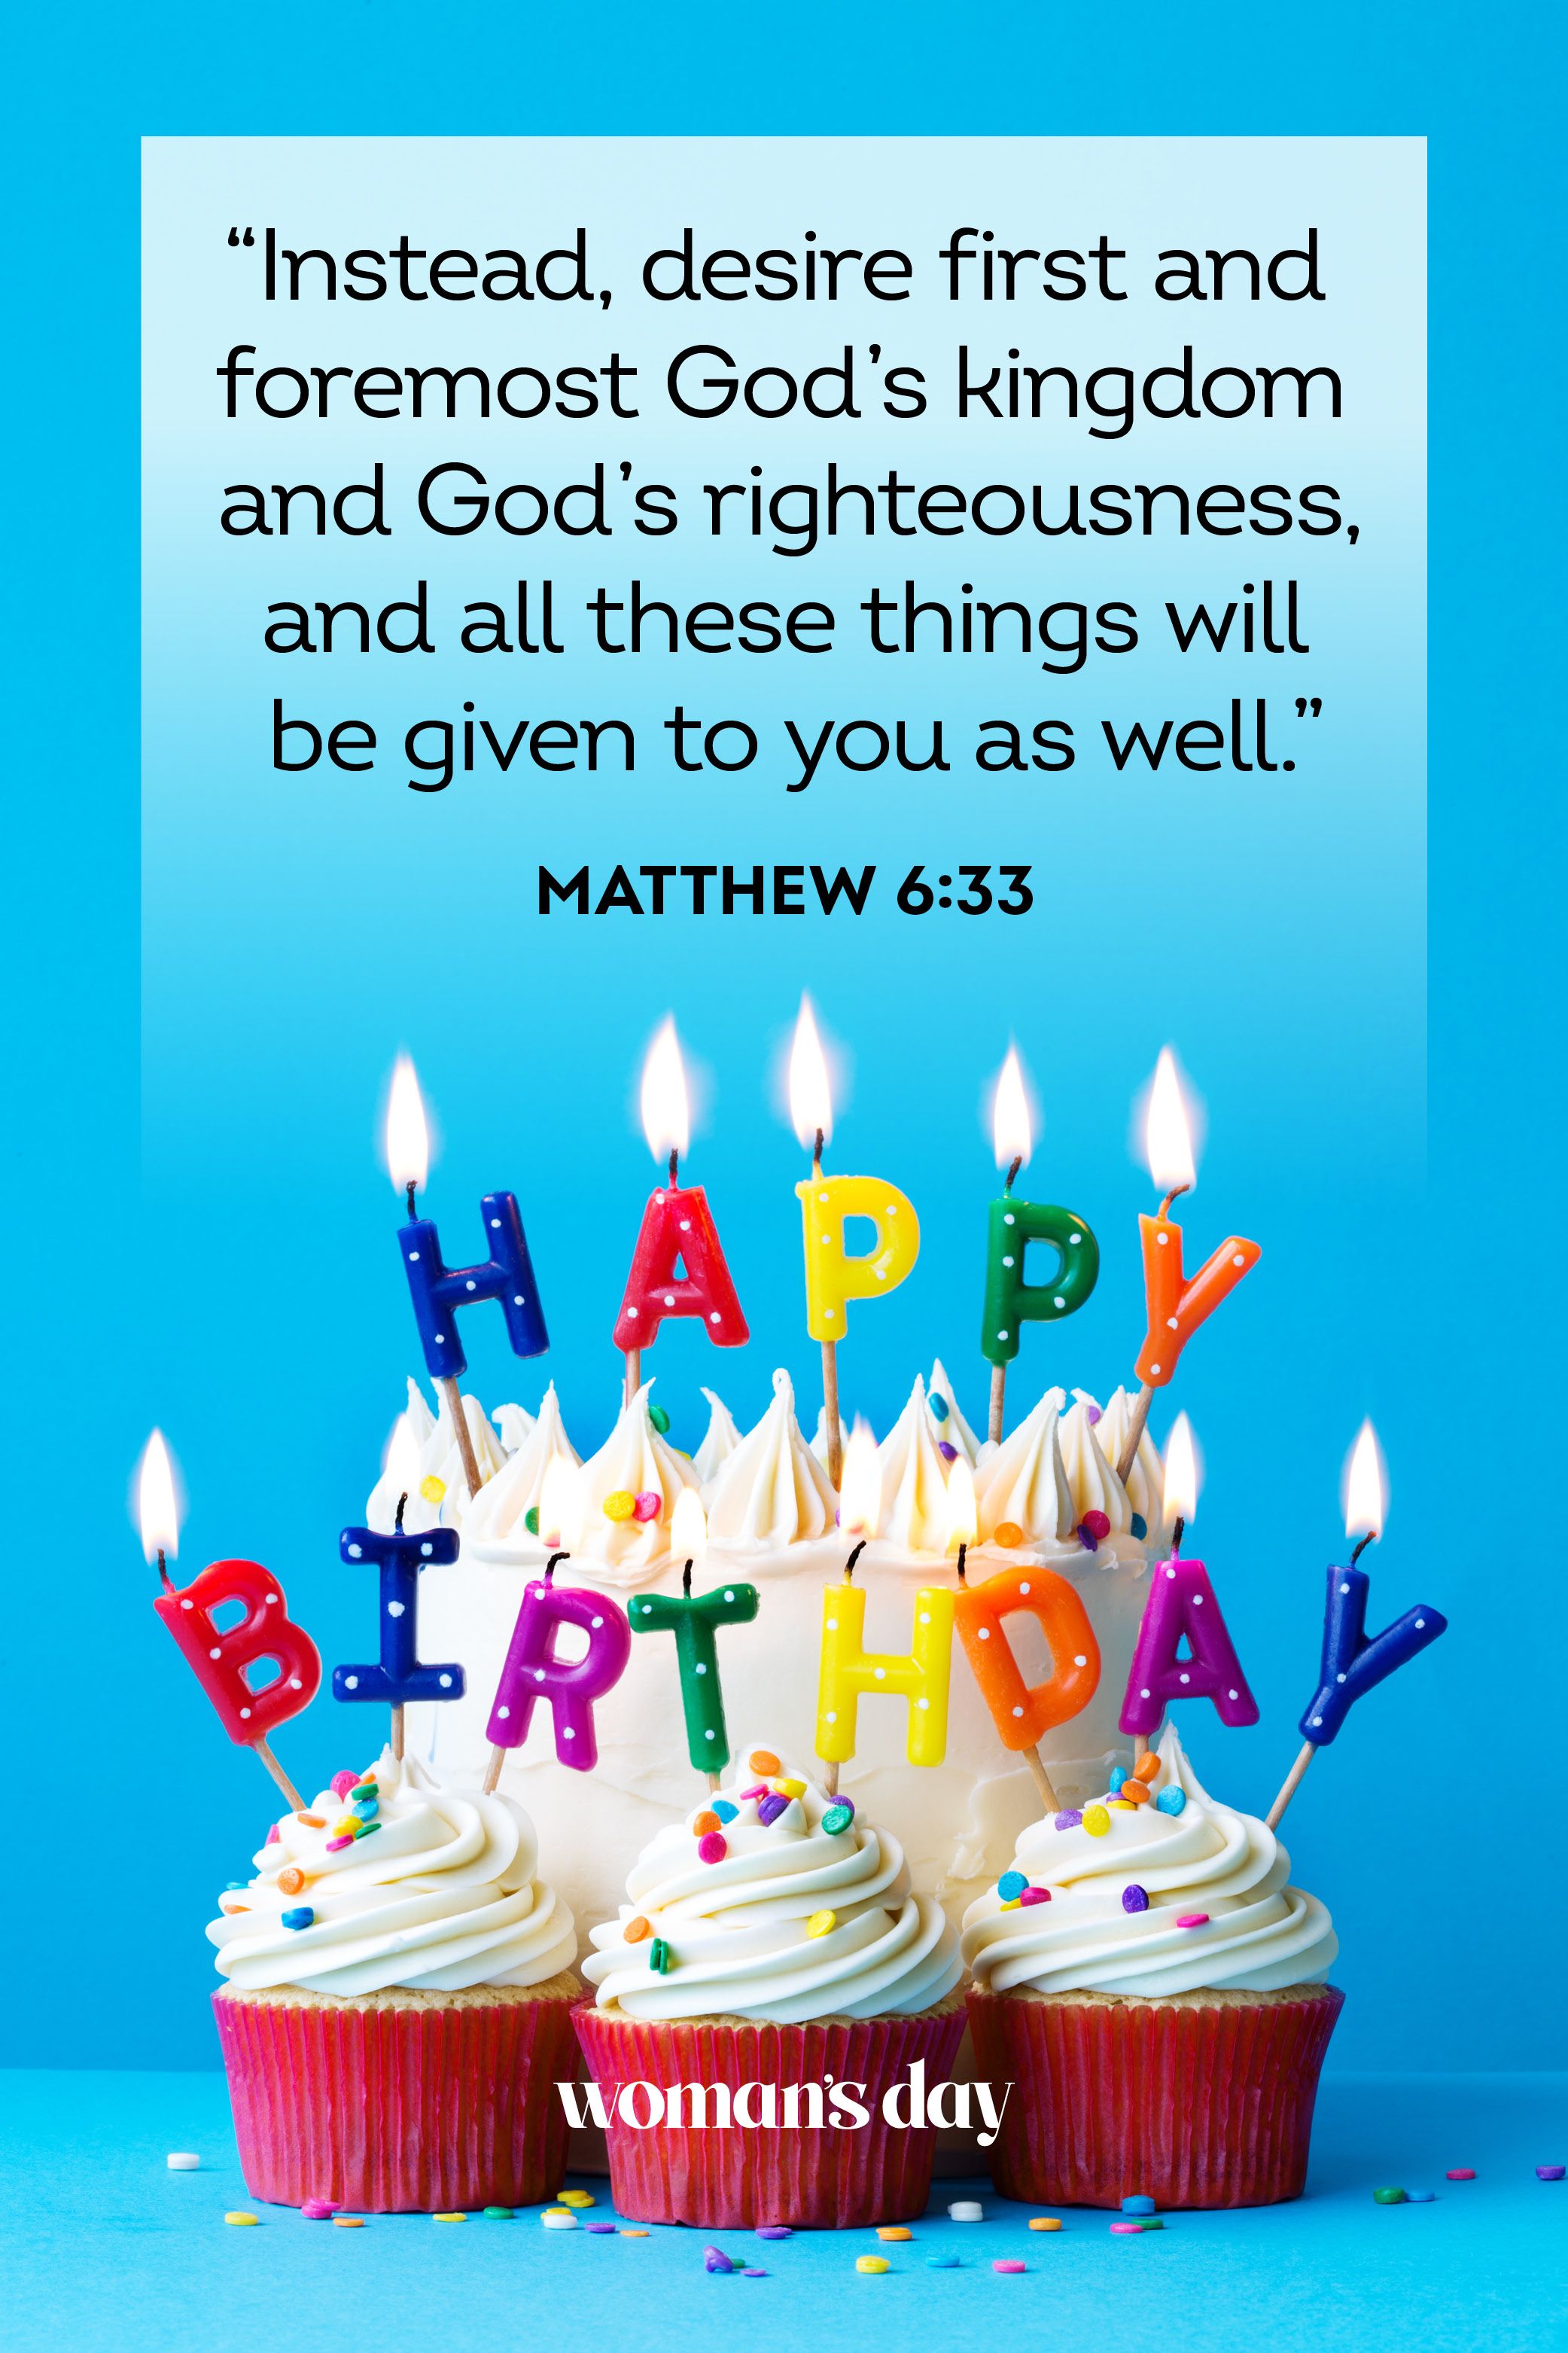 birthday wishes for someone special quotes